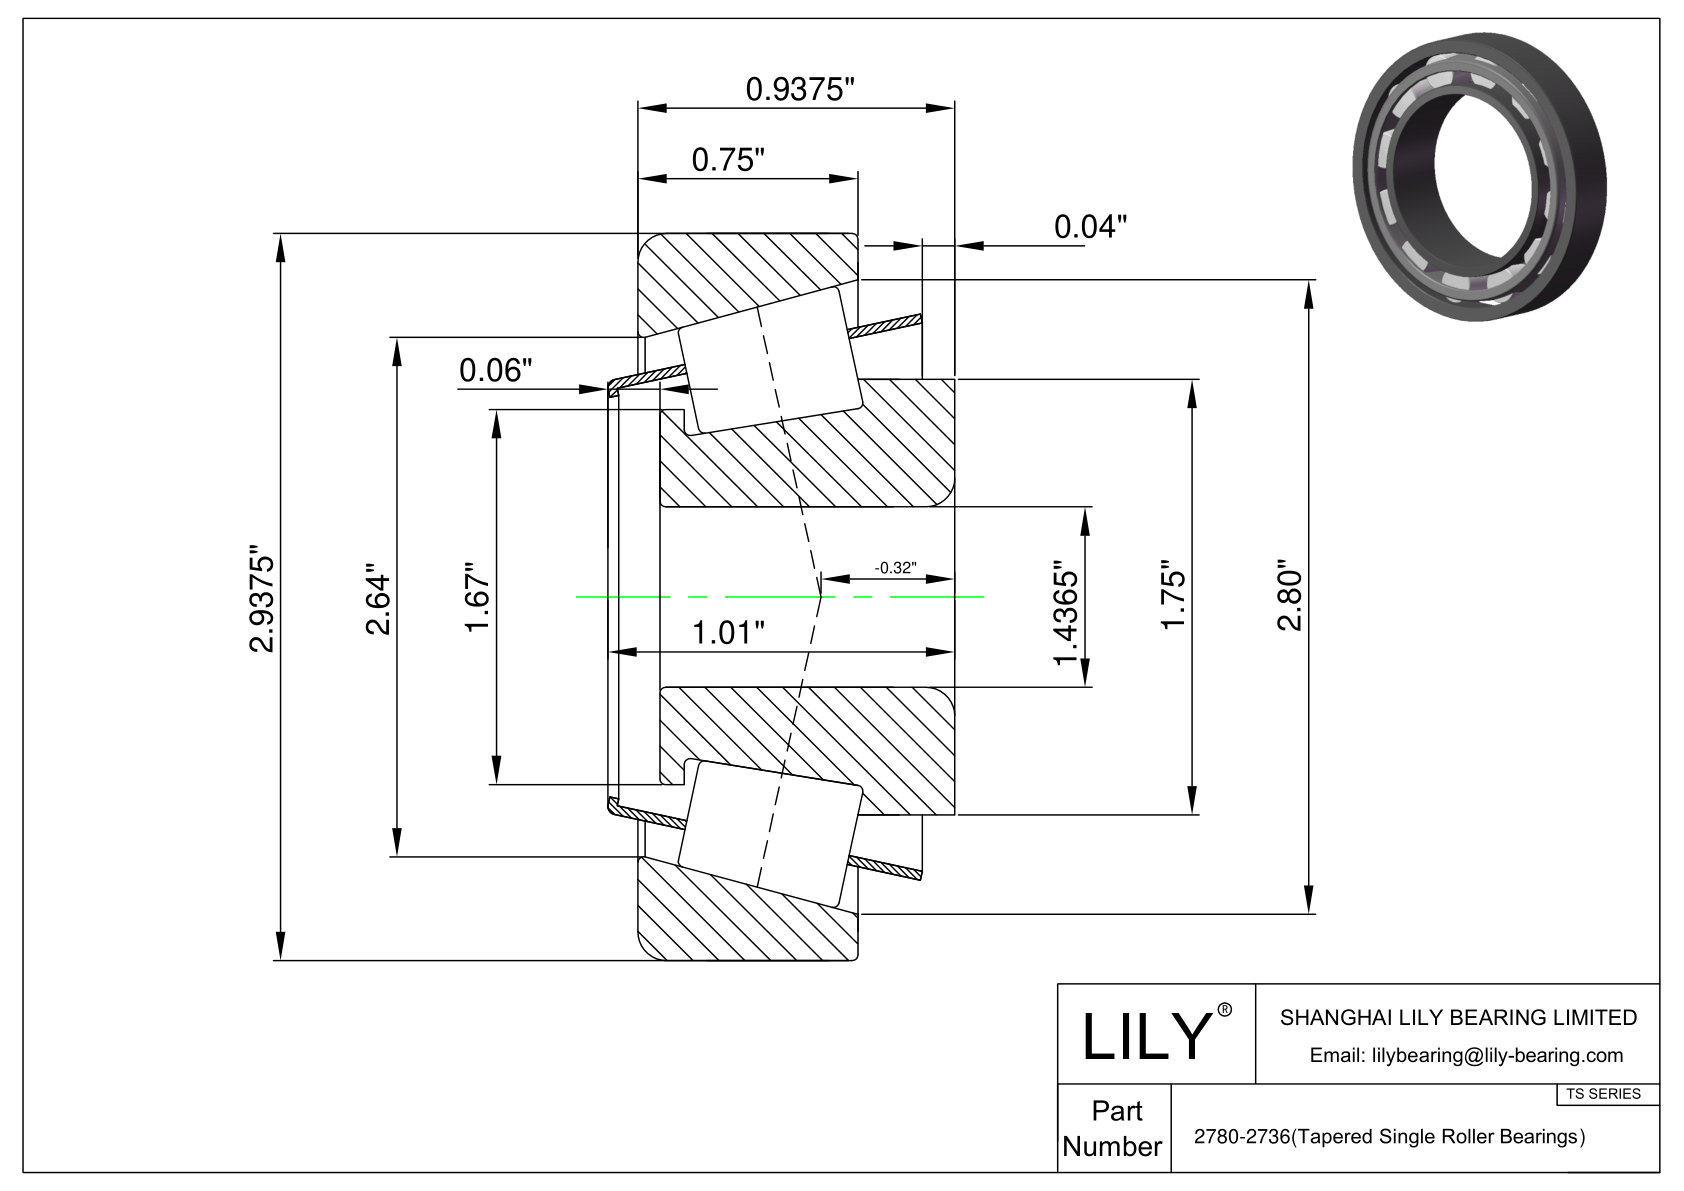 2780-2736 TS (Tapered Single Roller Bearings) (Imperial) cad drawing